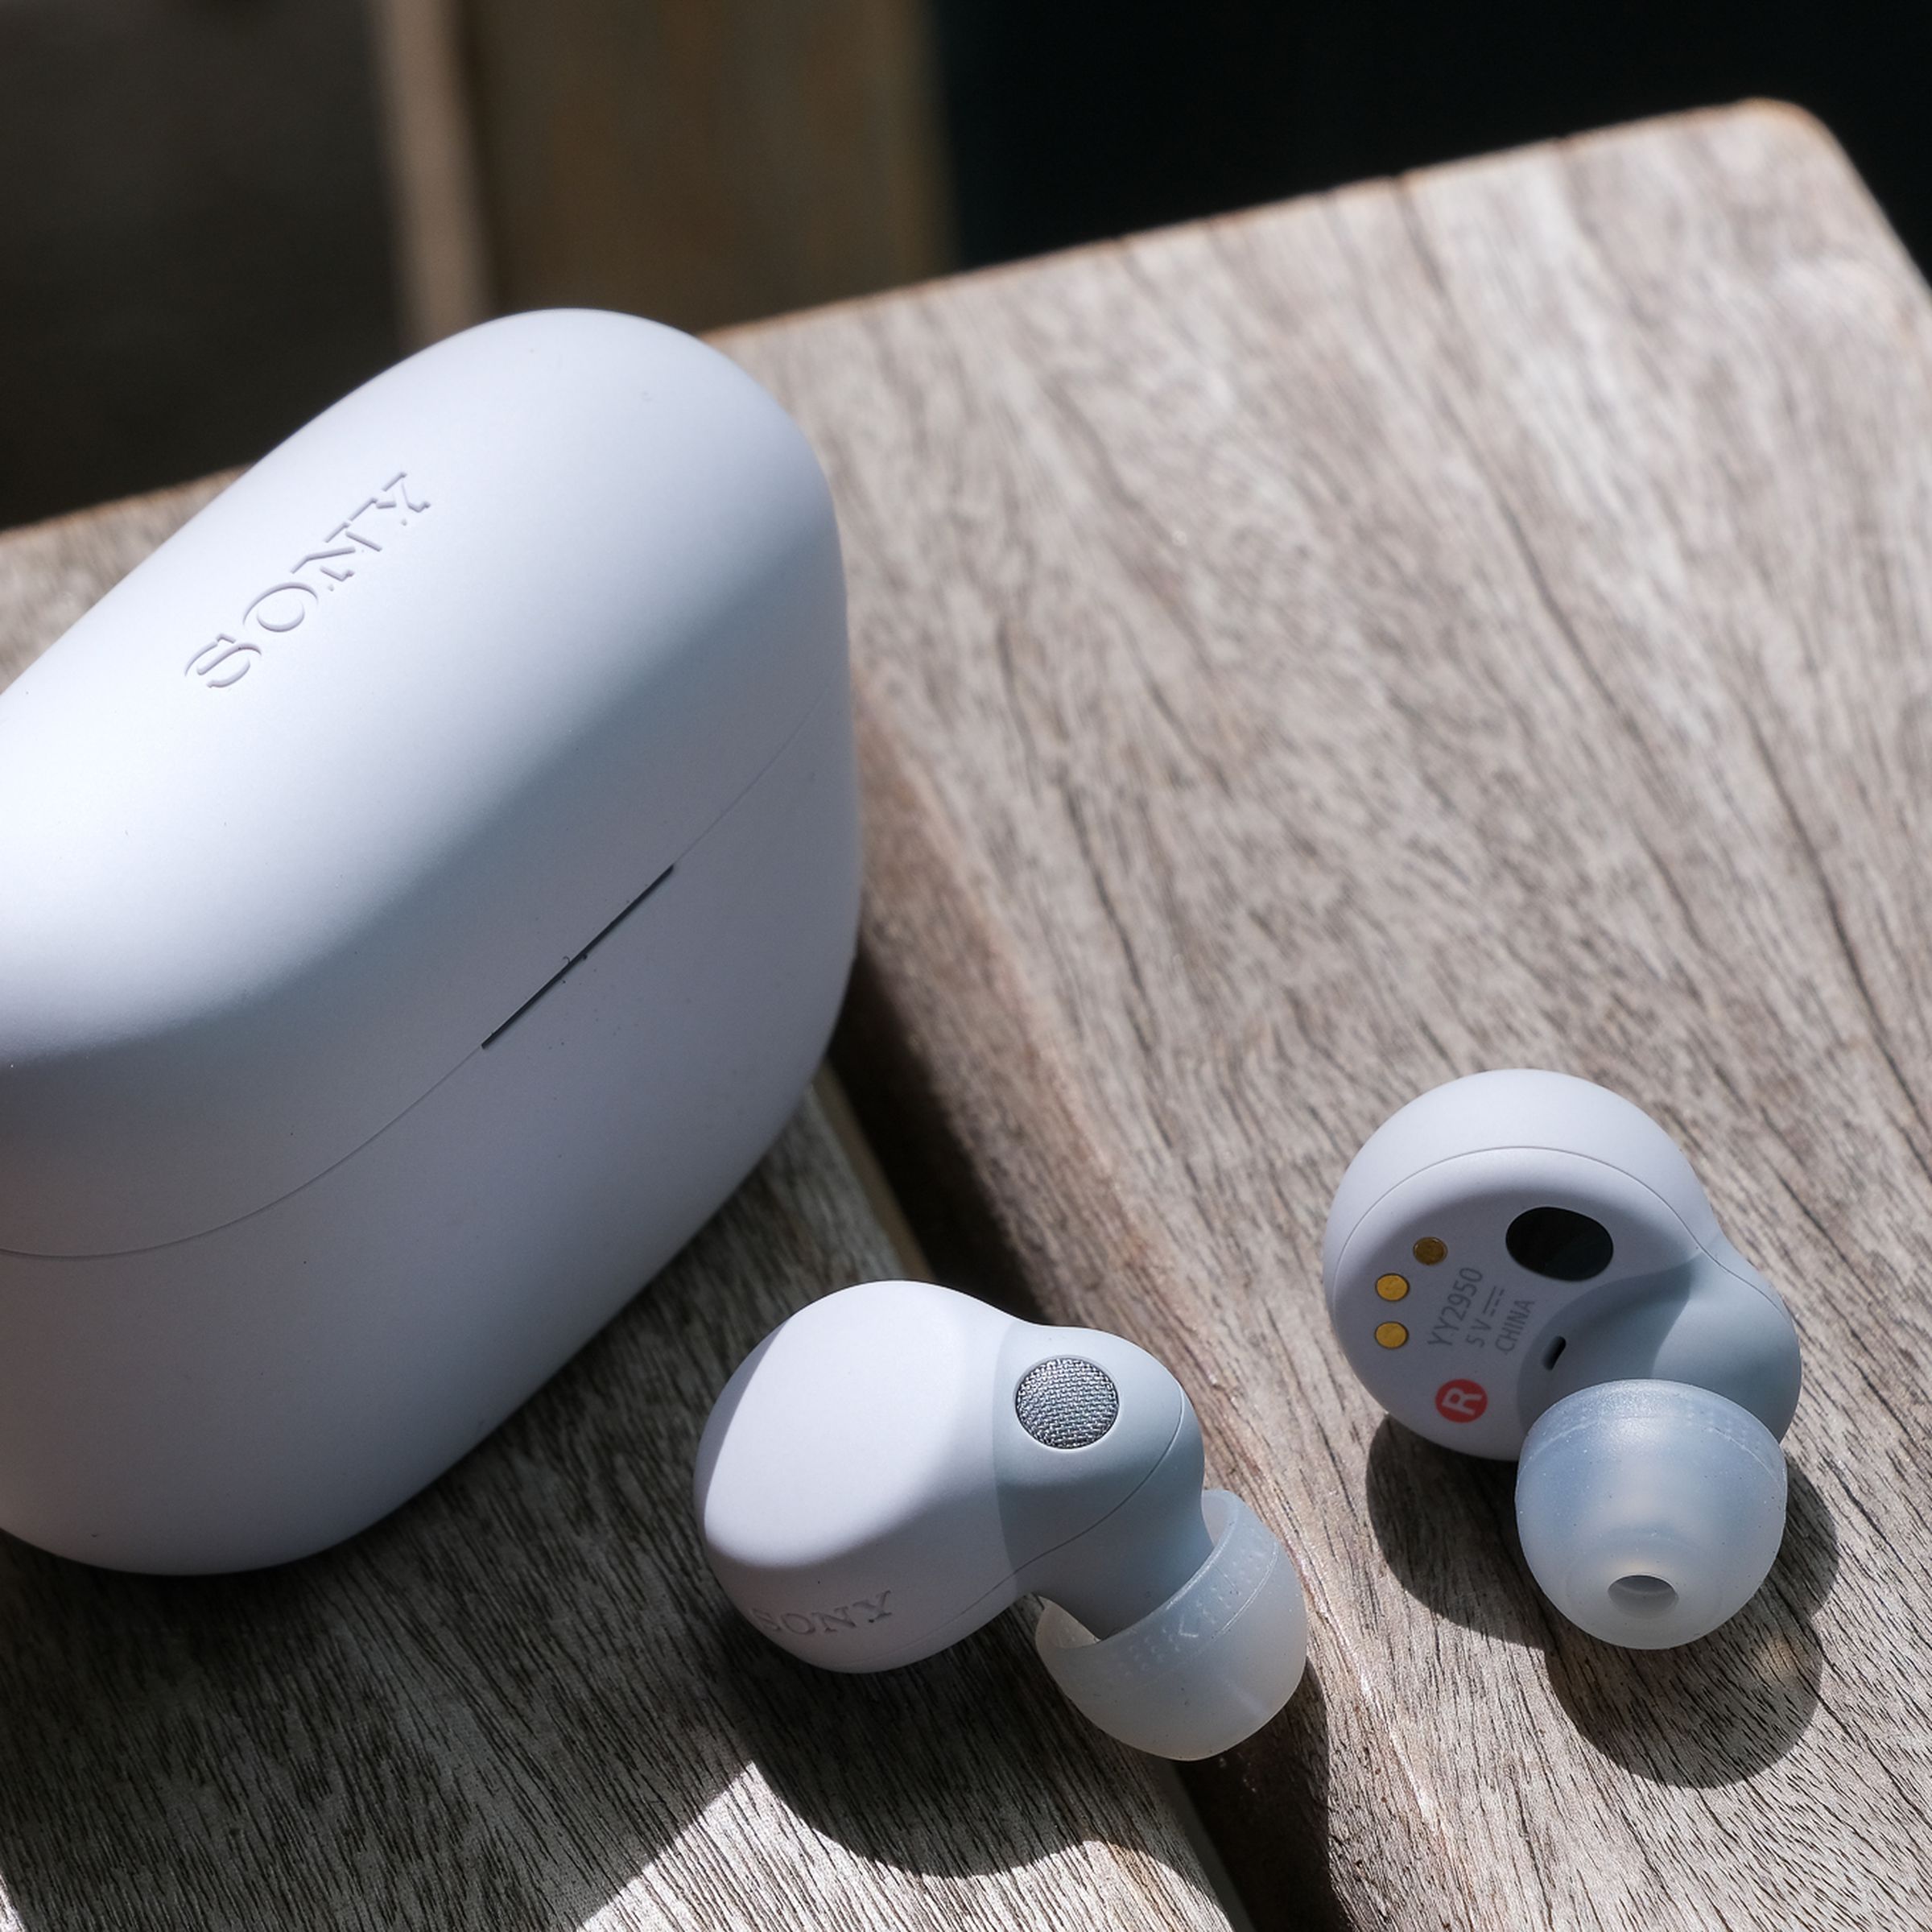 The white Sony LinkBuds S wireless earbuds and their charging case sitting on the edge of a wood table.